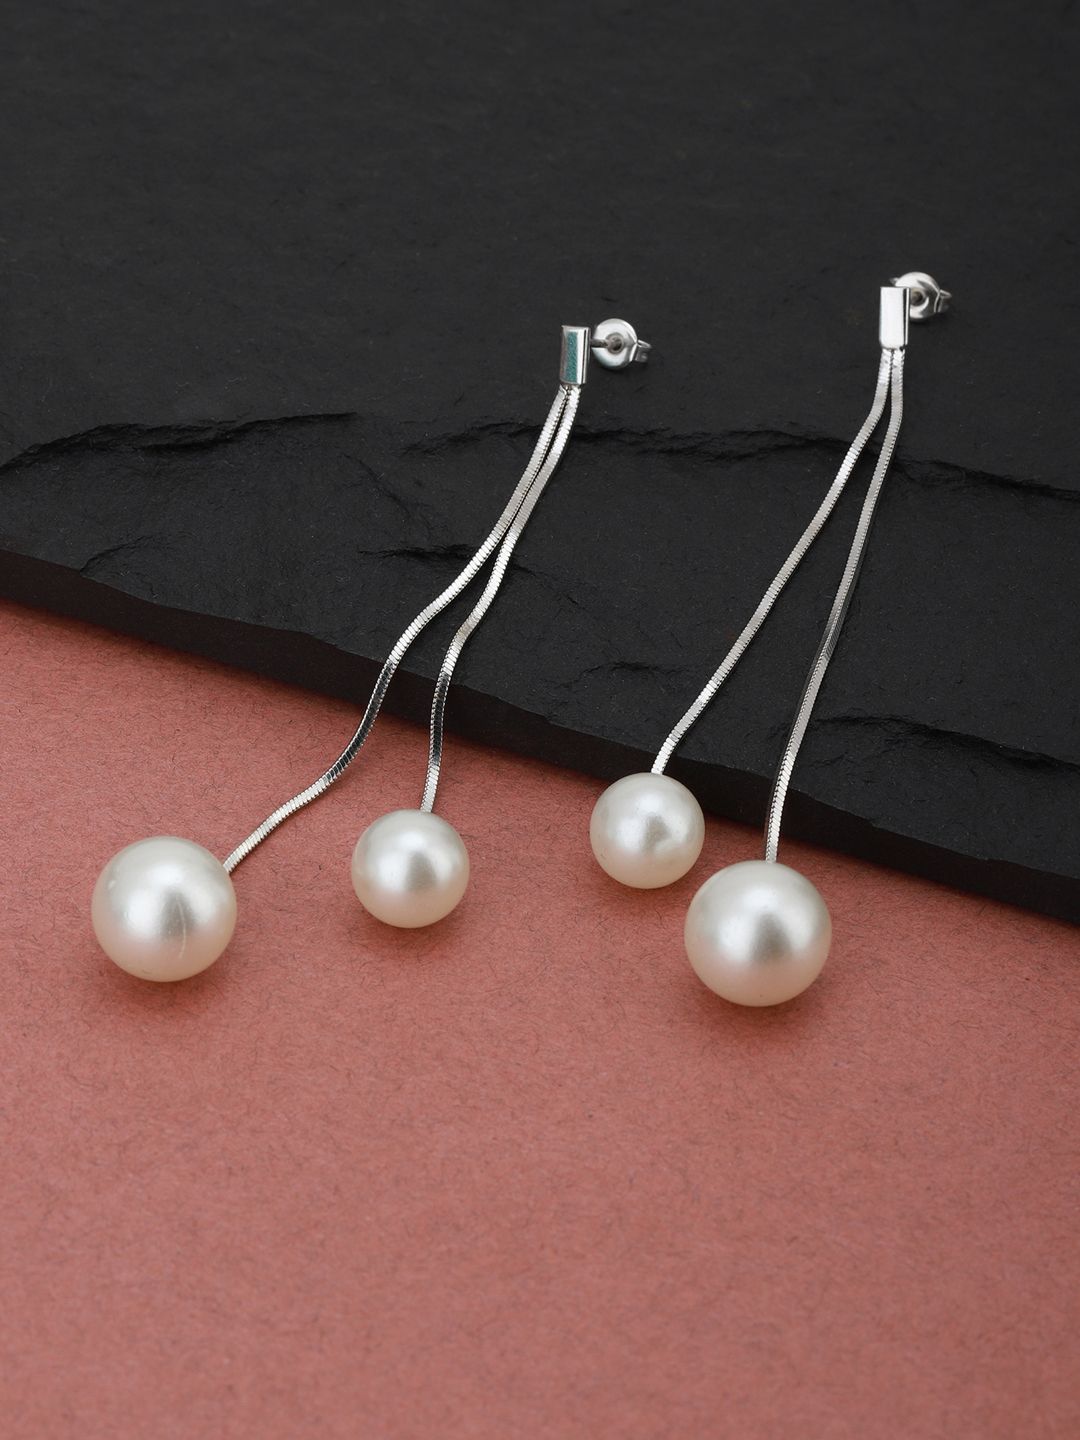 Carlton London Rhodium-Plated Silver-Toned & White Contemporary Drop Earrings Price in India